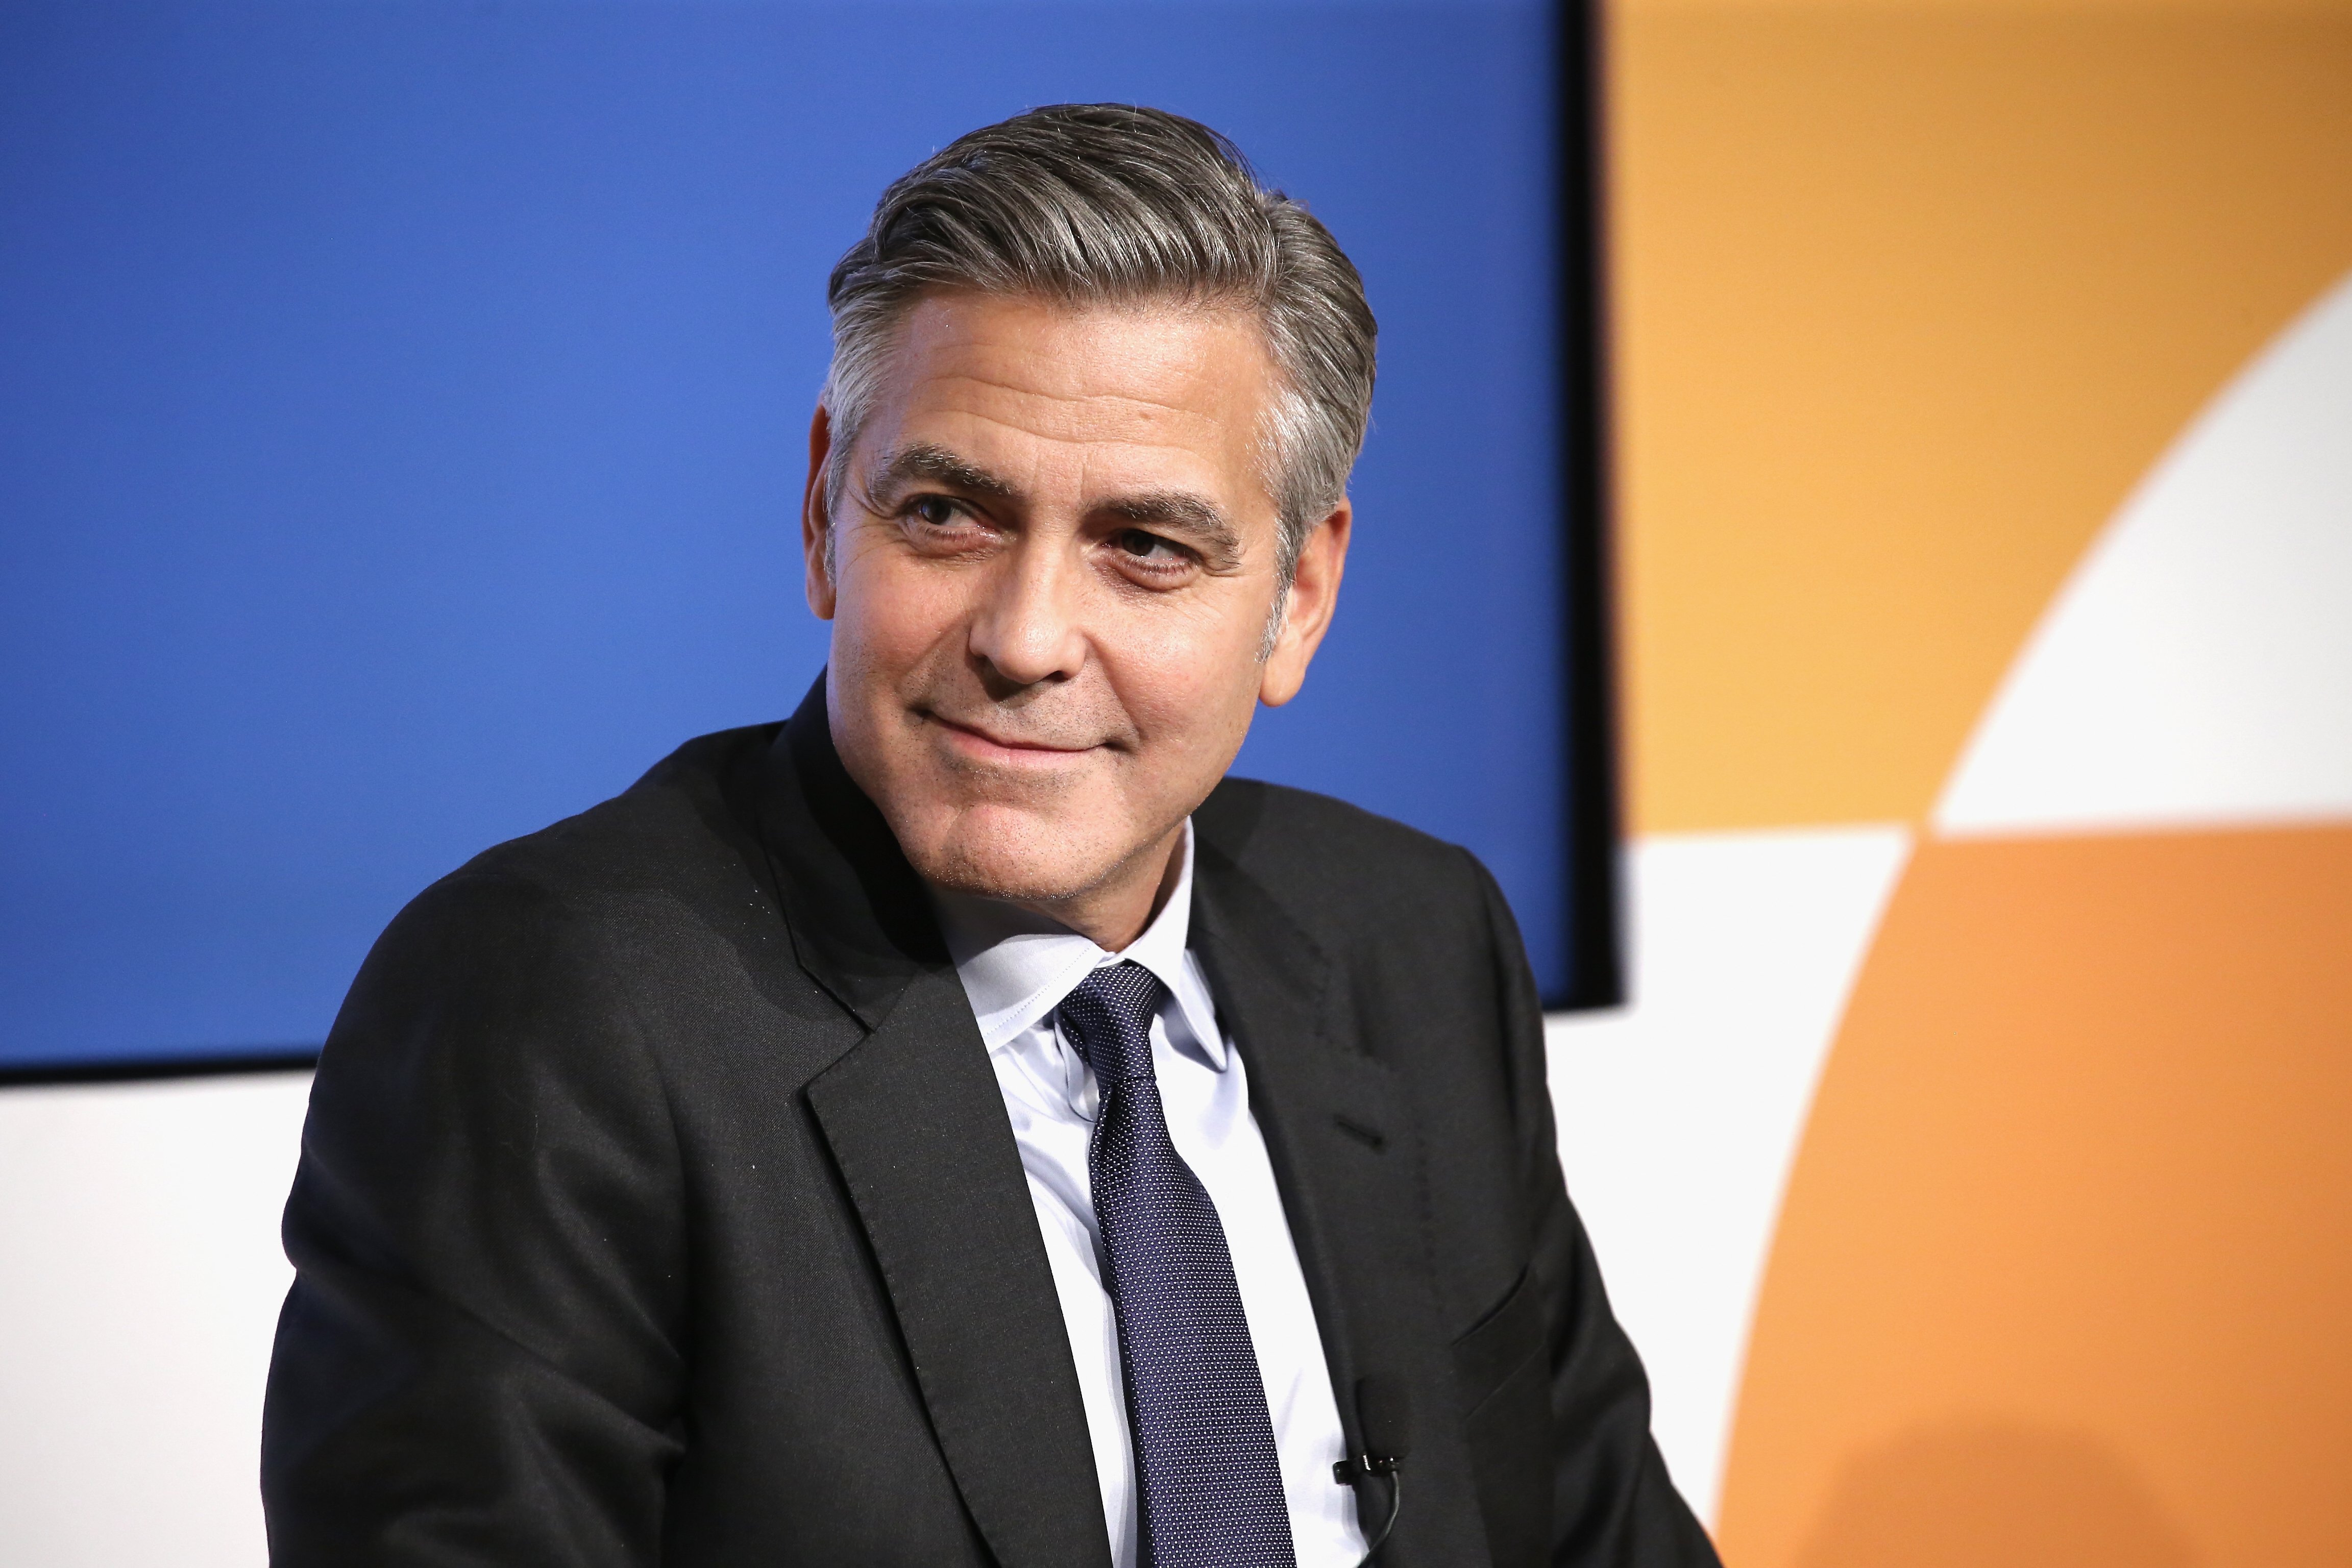 George Clooney onstage at The 100 Lives initiative on March 10, 2015, in New York City | Source: Getty Images